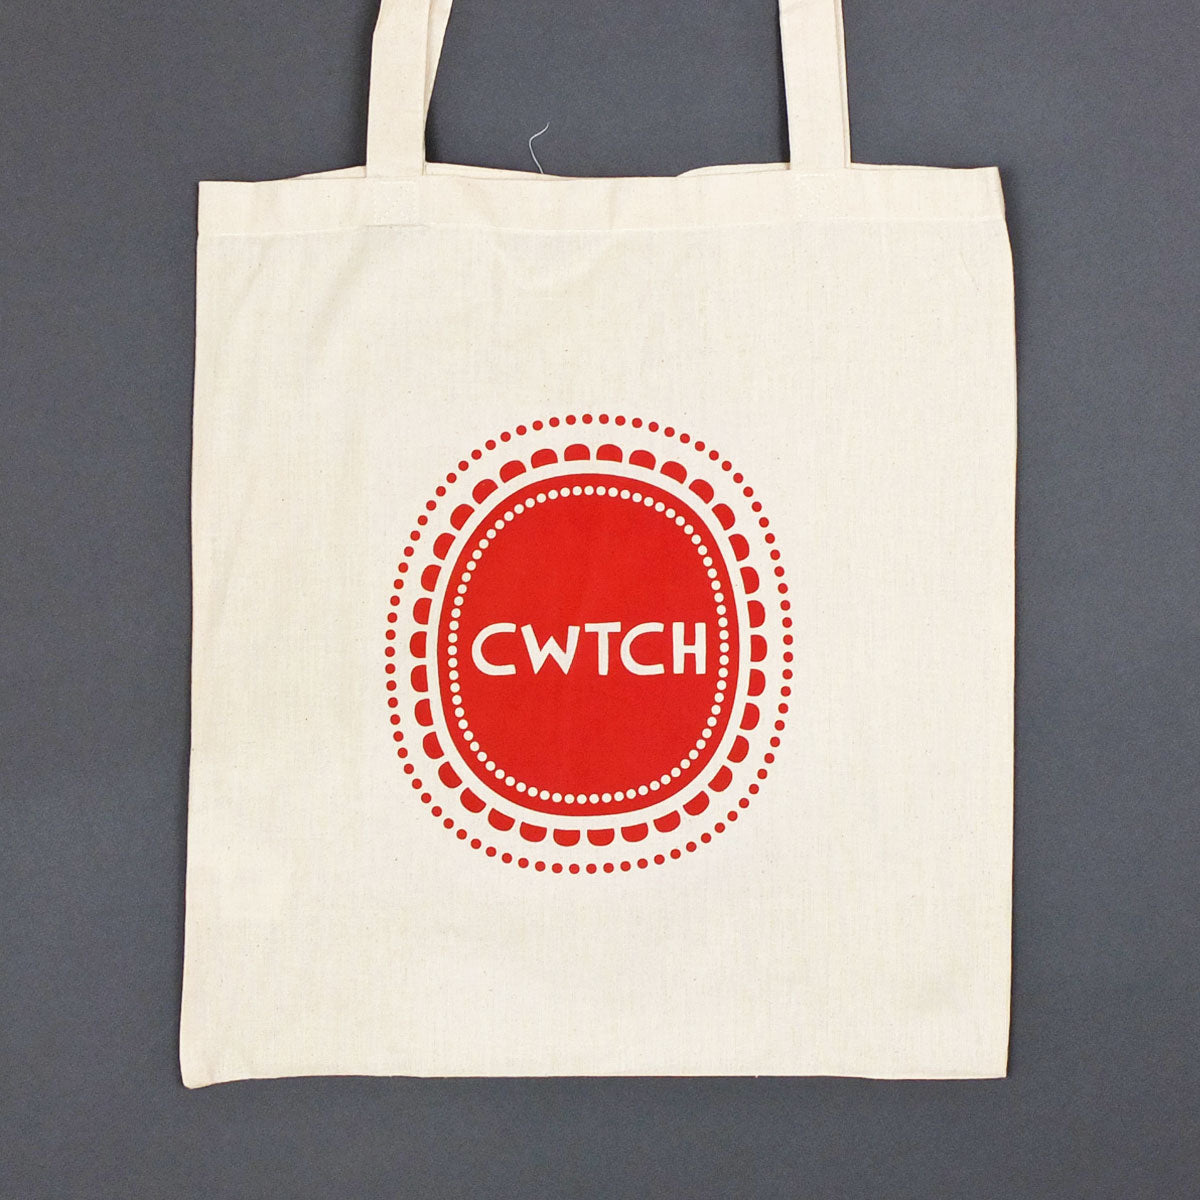 Cwtch in Dots Tote Bag